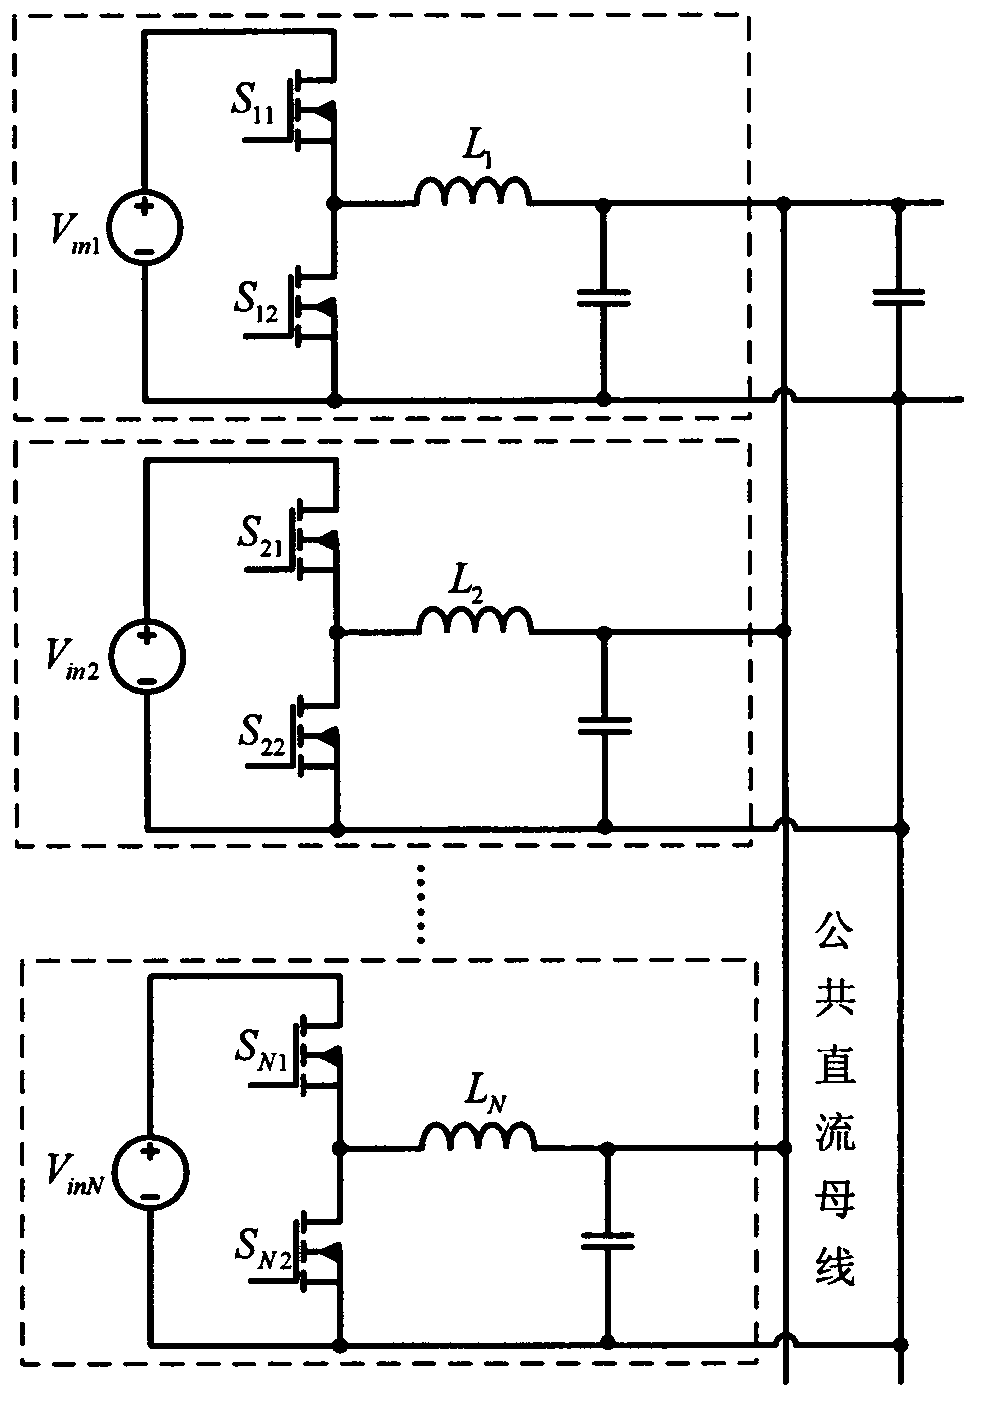 Non-isolated bidirectional multiport direct current (DC) converter